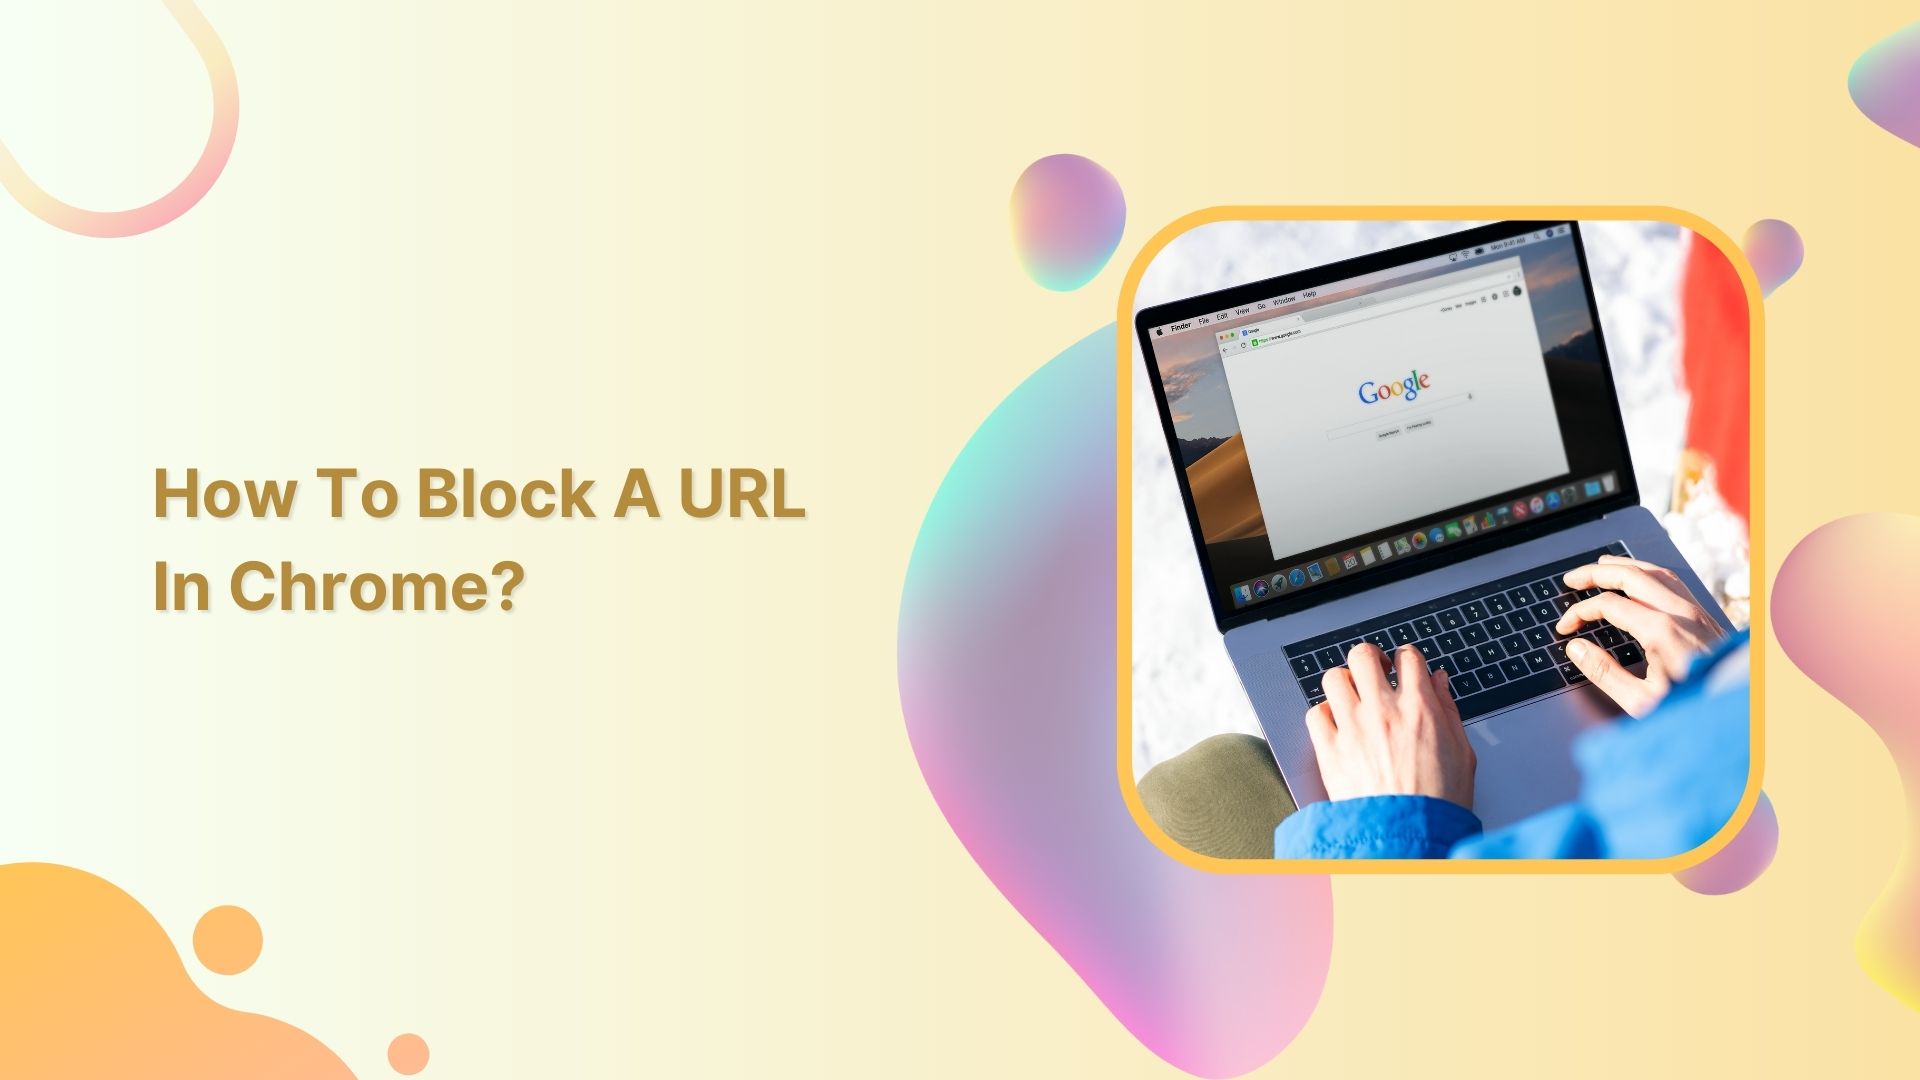 How to Block a URL in Chrome?